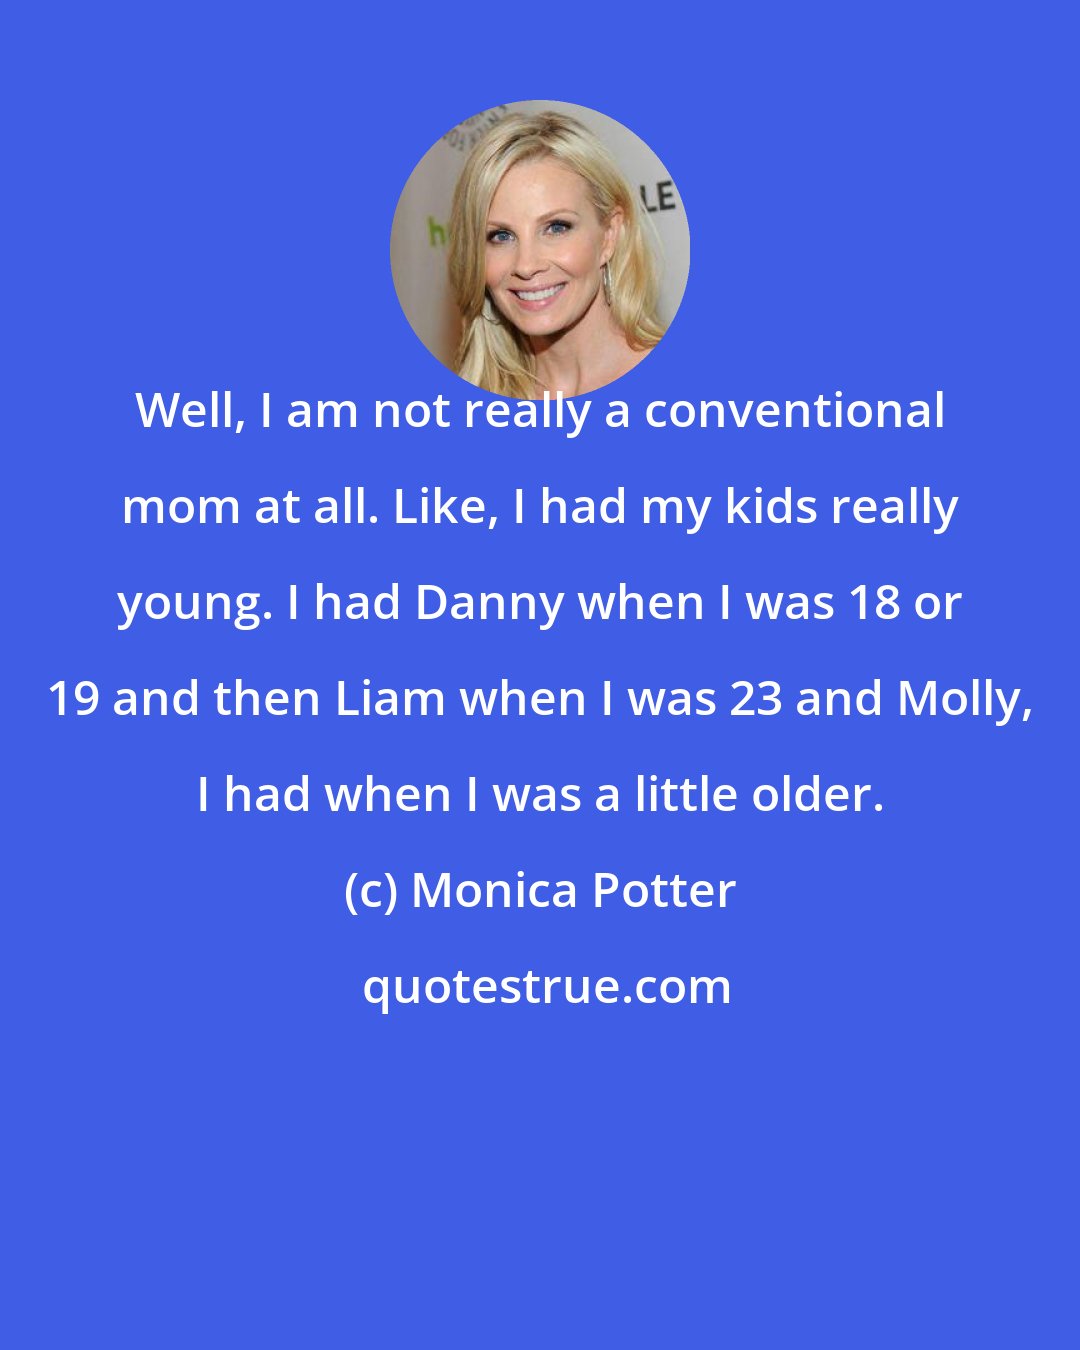 Monica Potter: Well, I am not really a conventional mom at all. Like, I had my kids really young. I had Danny when I was 18 or 19 and then Liam when I was 23 and Molly, I had when I was a little older.